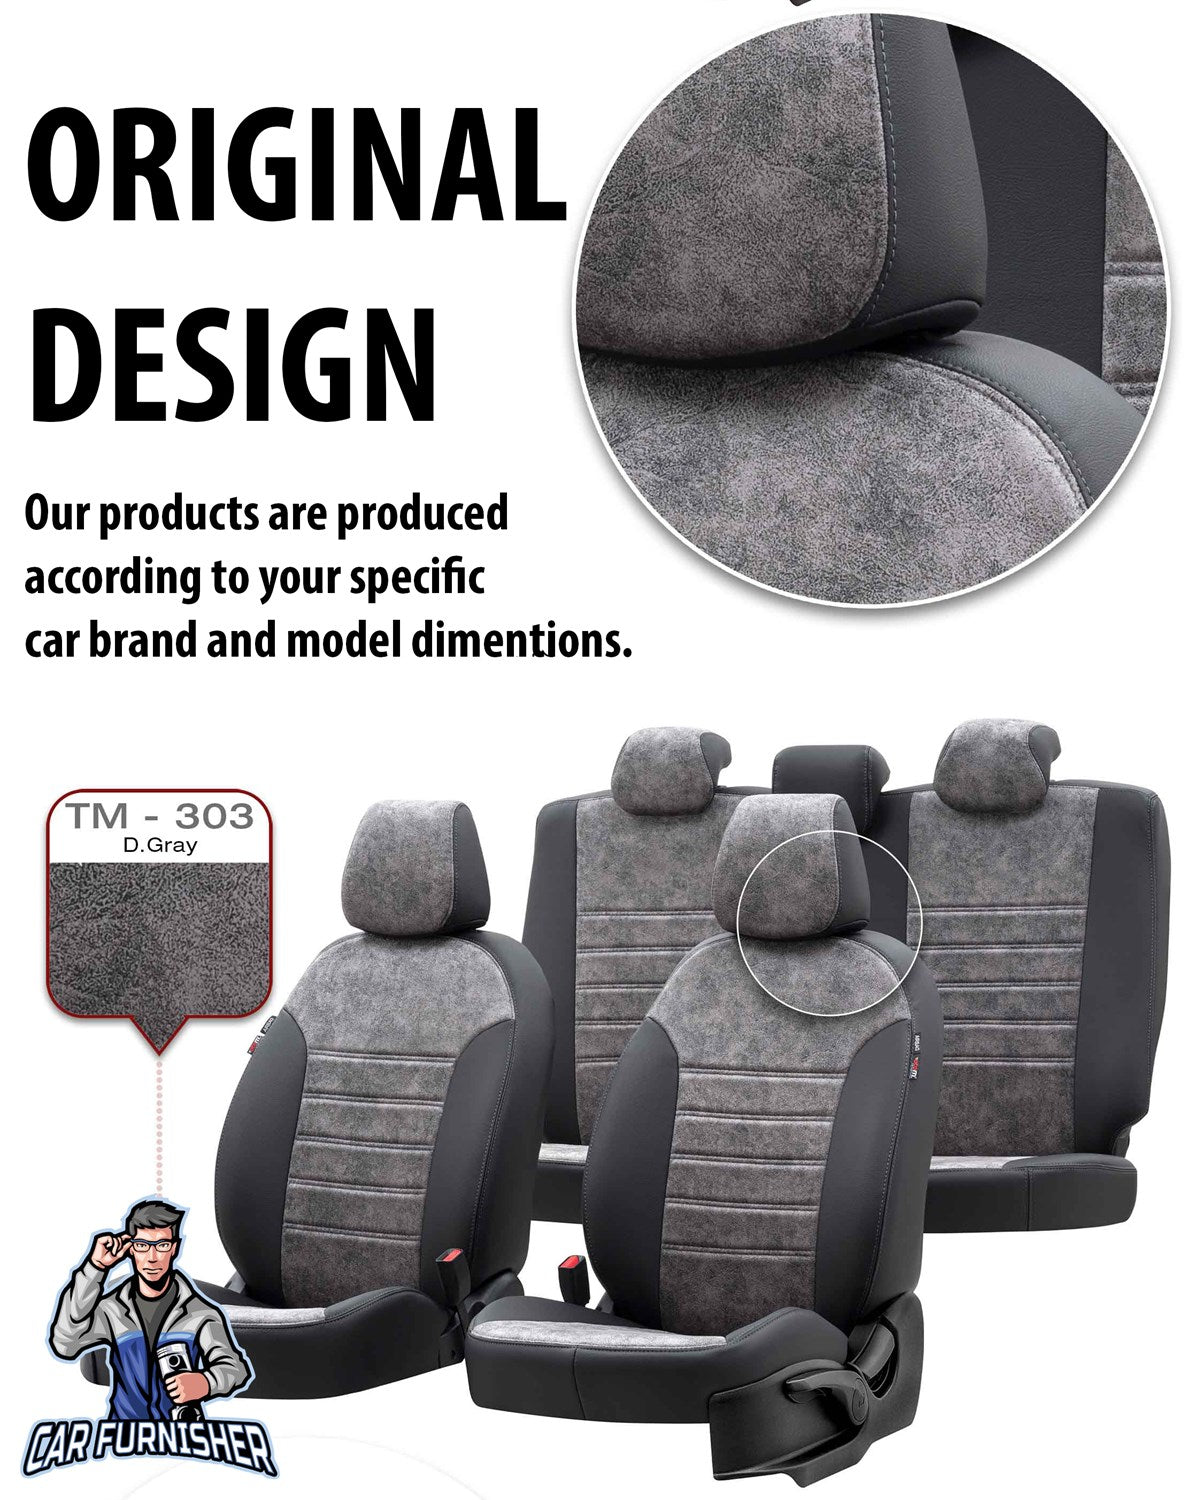 Volkswagen Sharan Seat Cover Milano Suede Design Smoked Black Leather & Suede Fabric